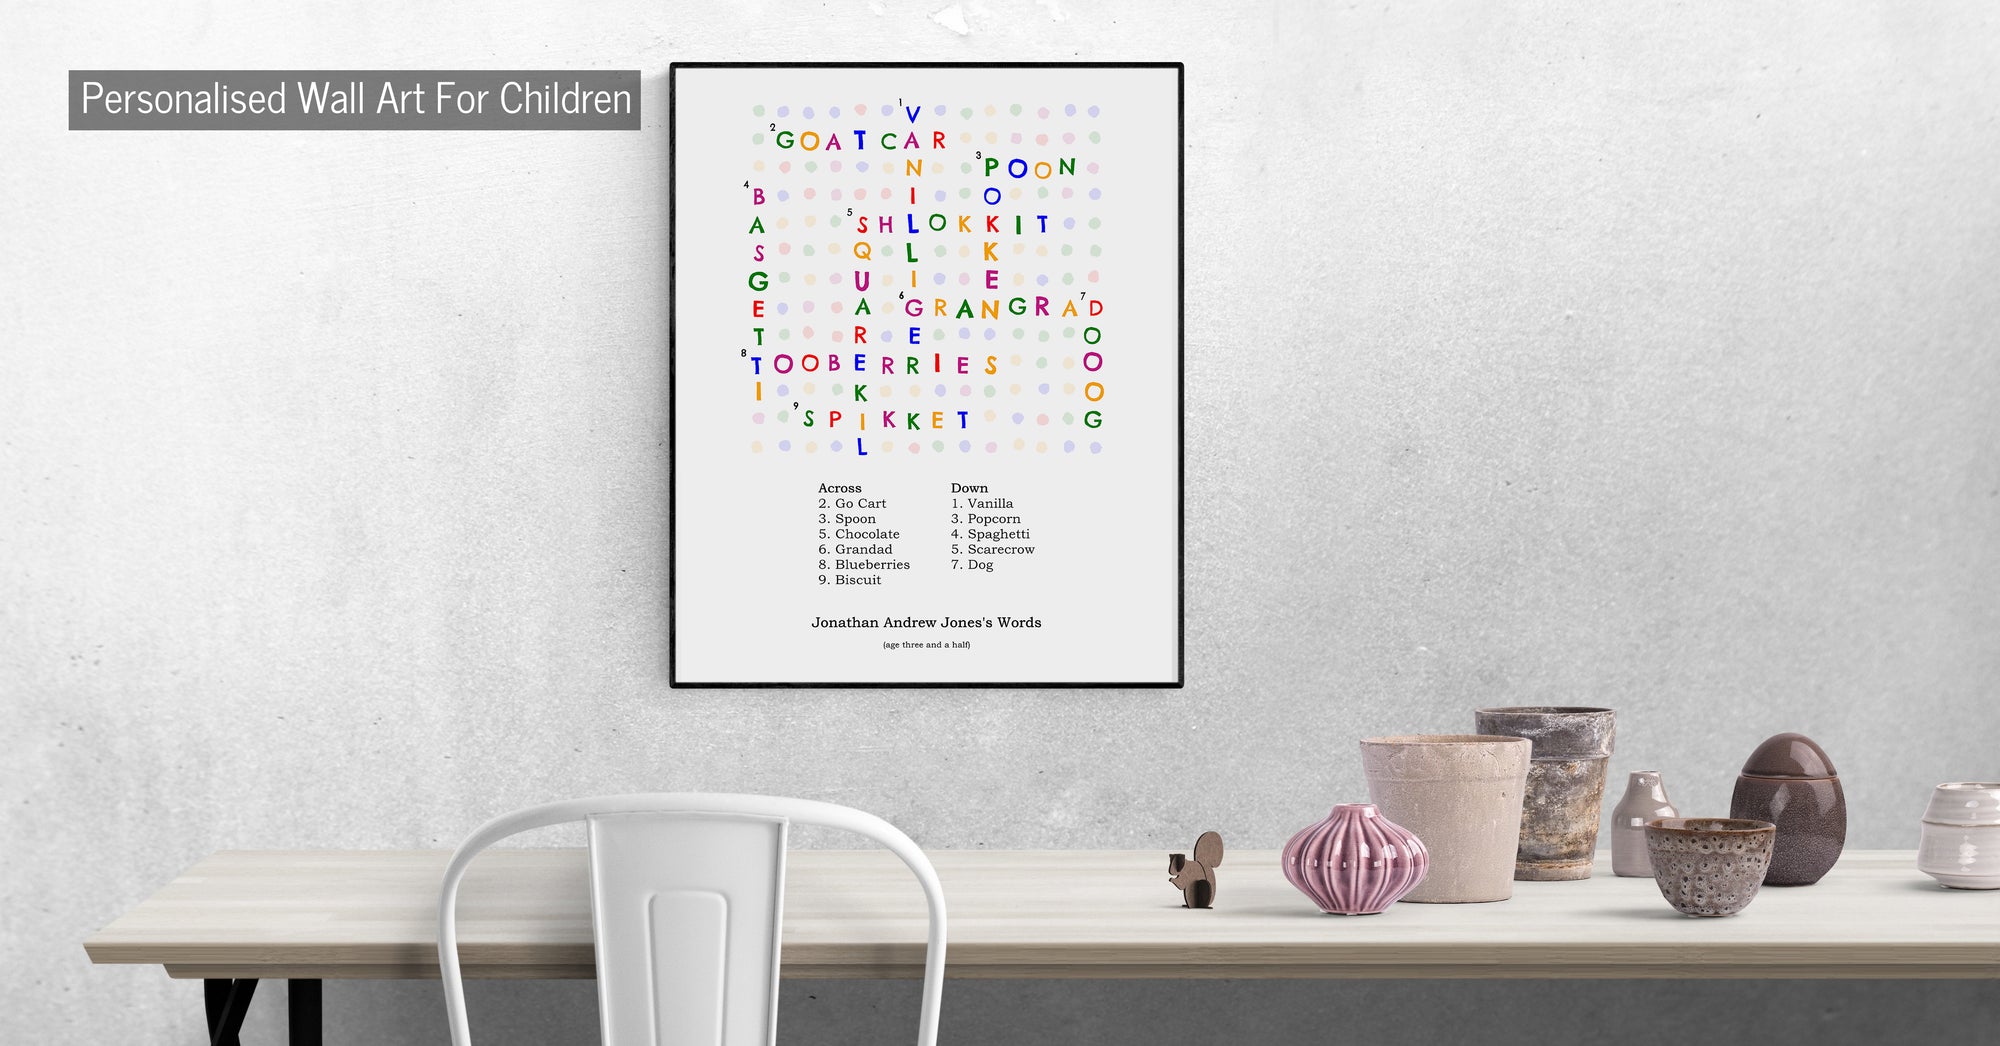 Personalised Wall Art For Children